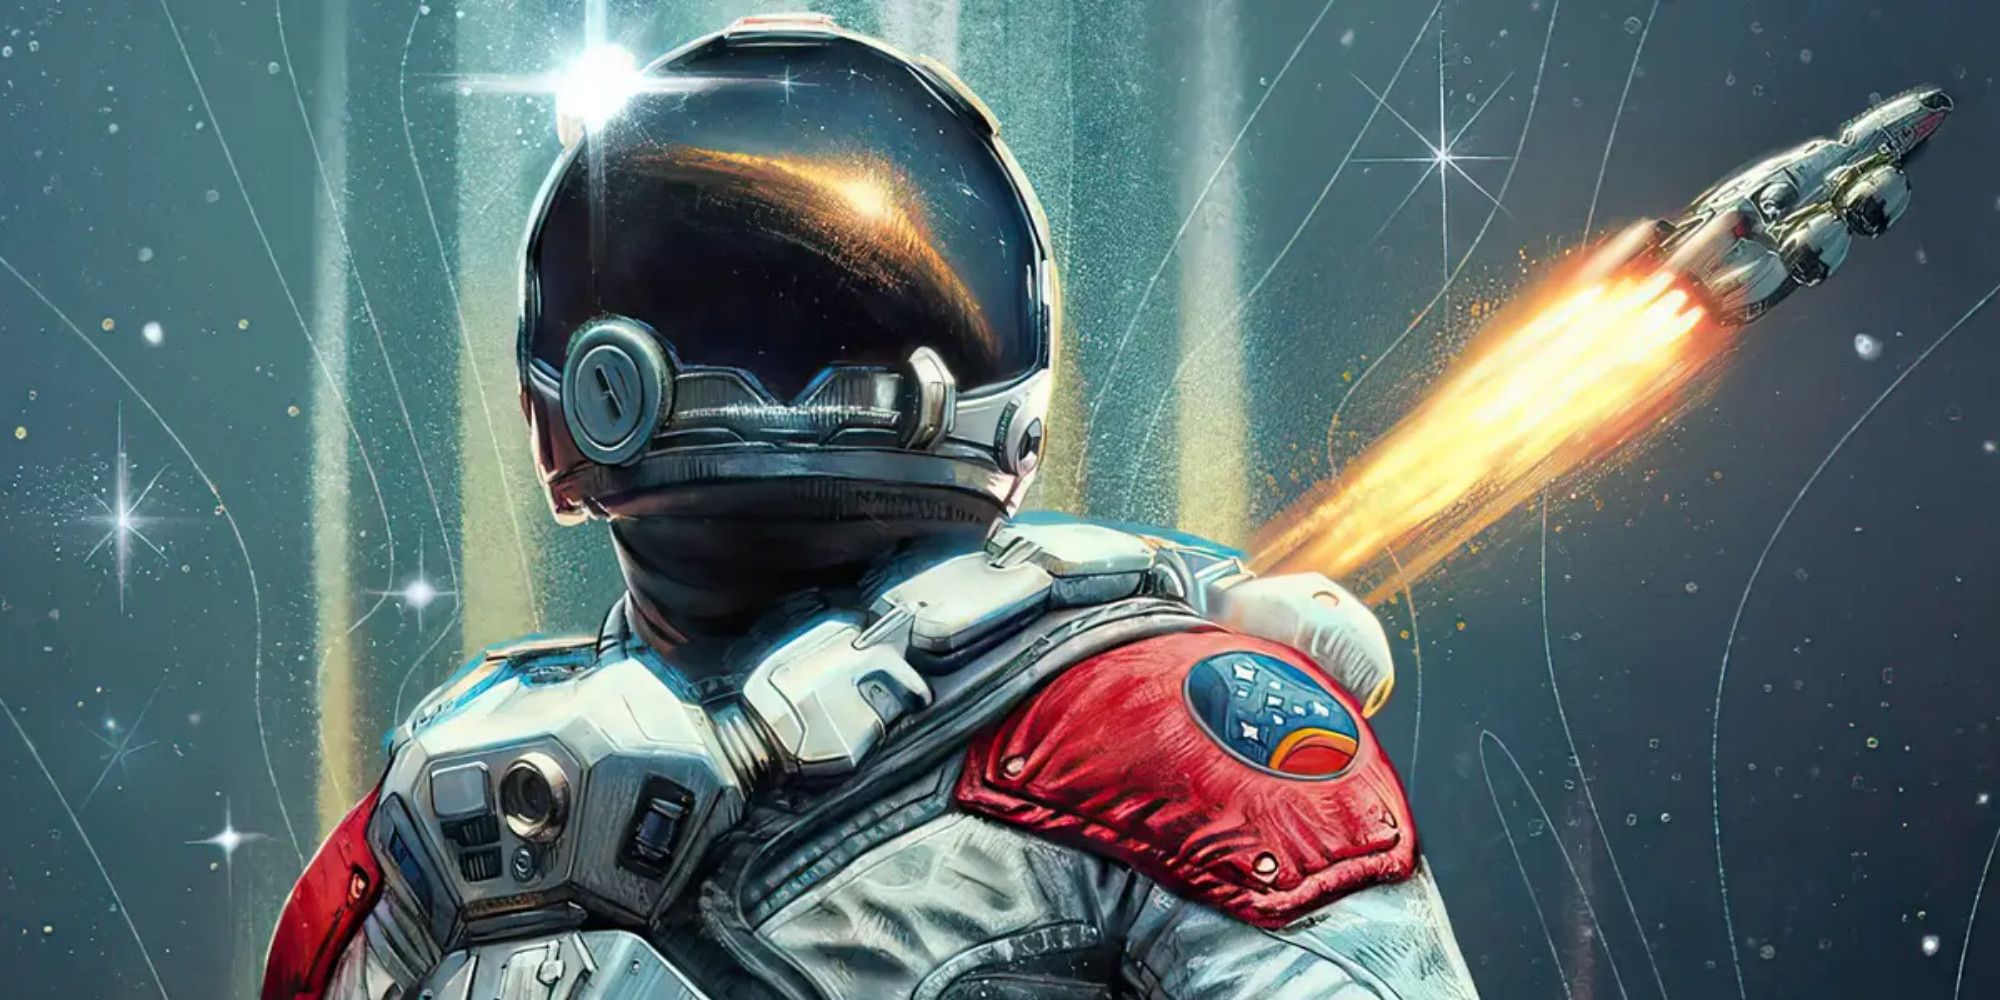 Close up of an astronaut from Starfield with a spaceship flying in the background